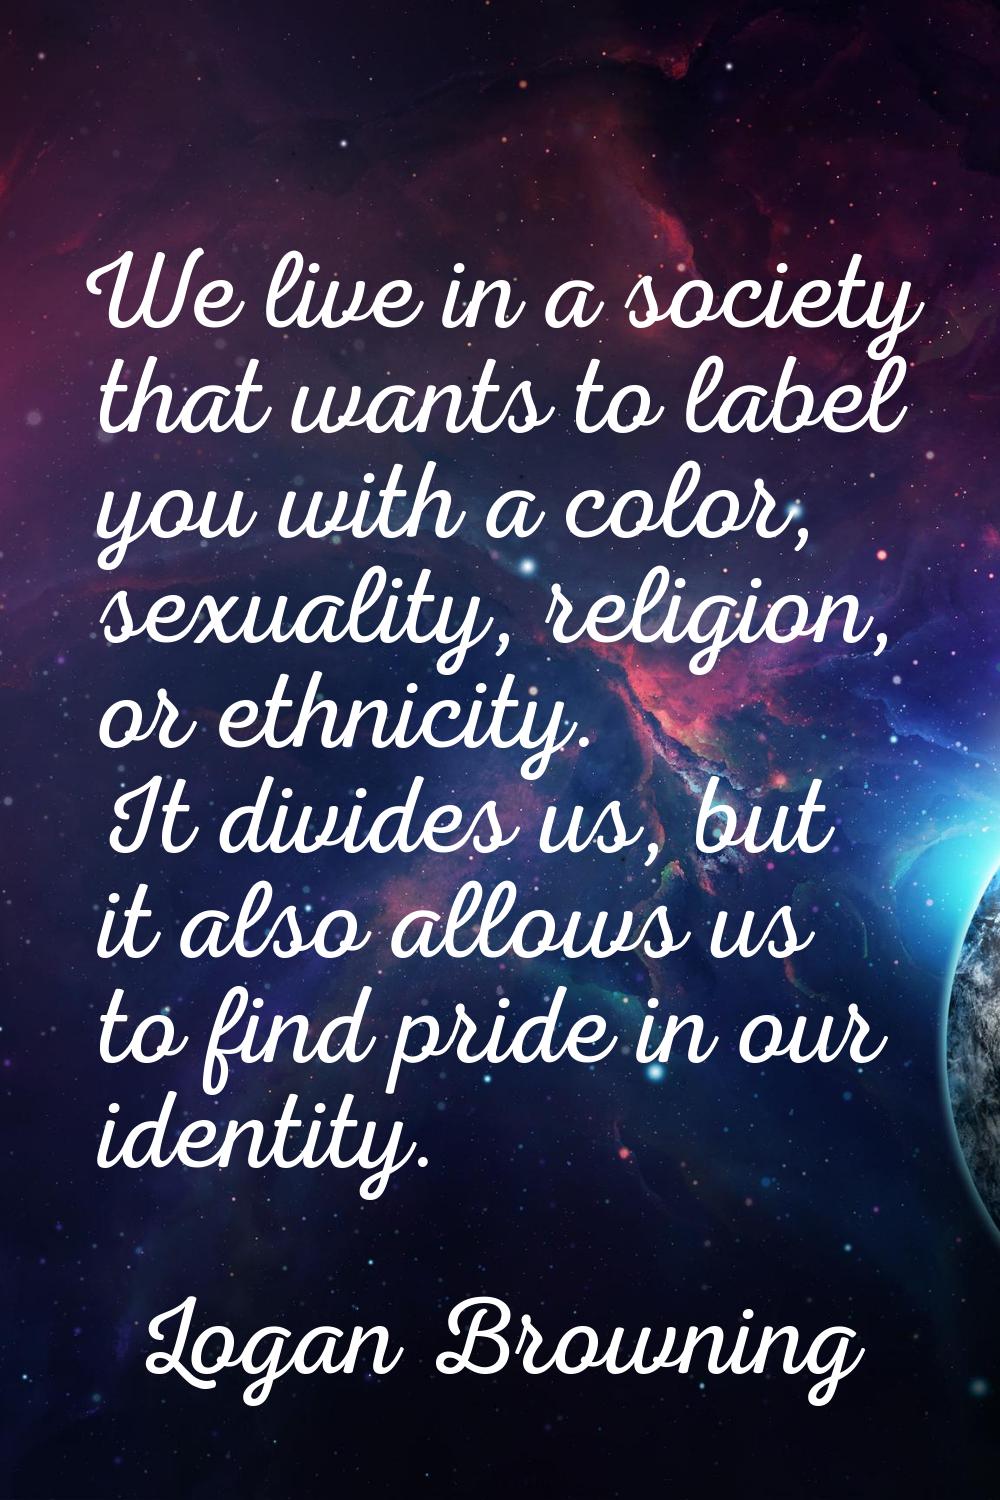 We live in a society that wants to label you with a color, sexuality, religion, or ethnicity. It di